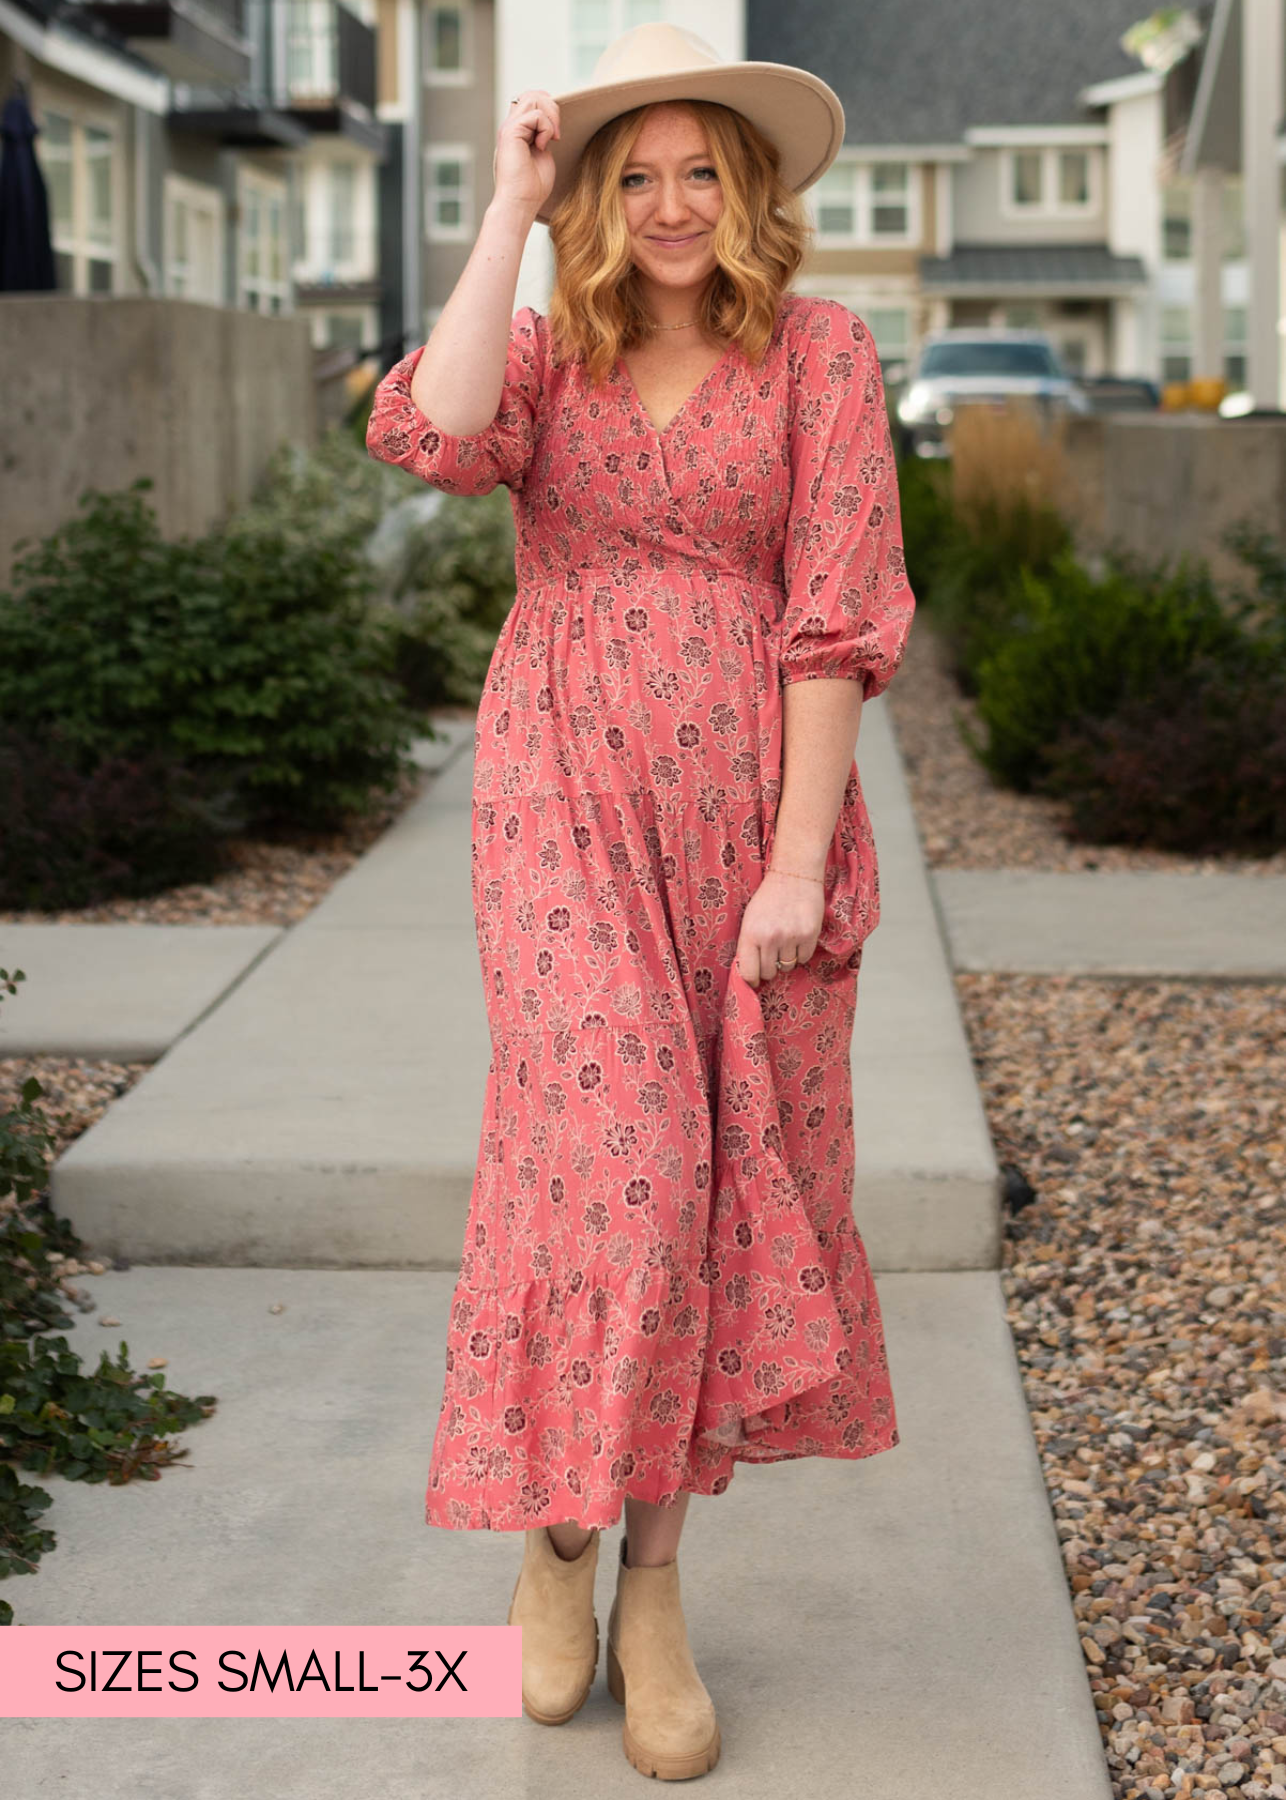 Tiered red floral dress